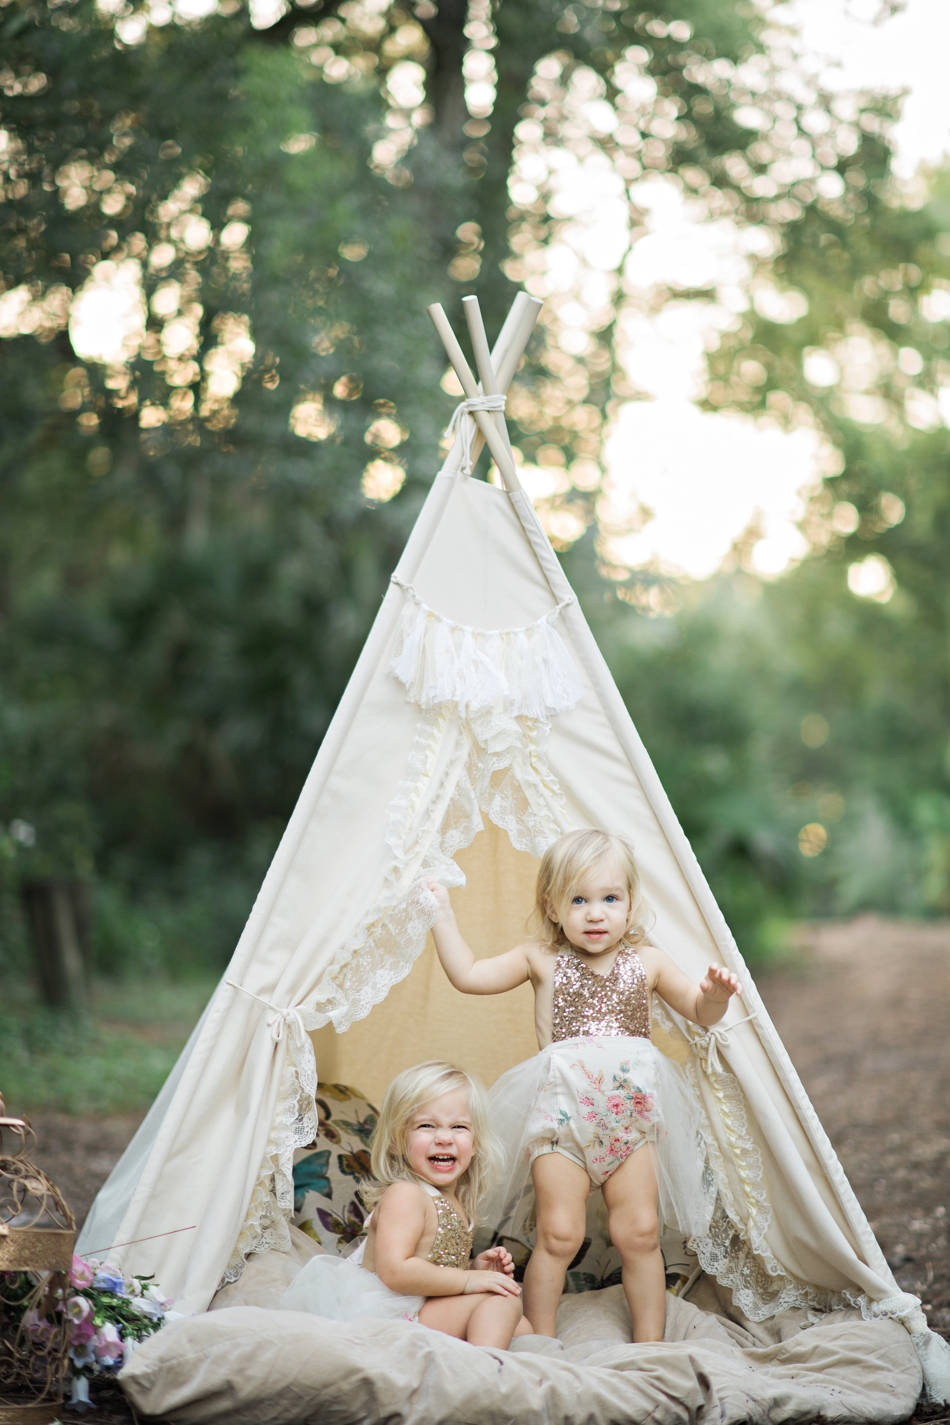 cute etsy kids outfits - 2 year old twins photoshoot with bohemian teepee and butterfly theme